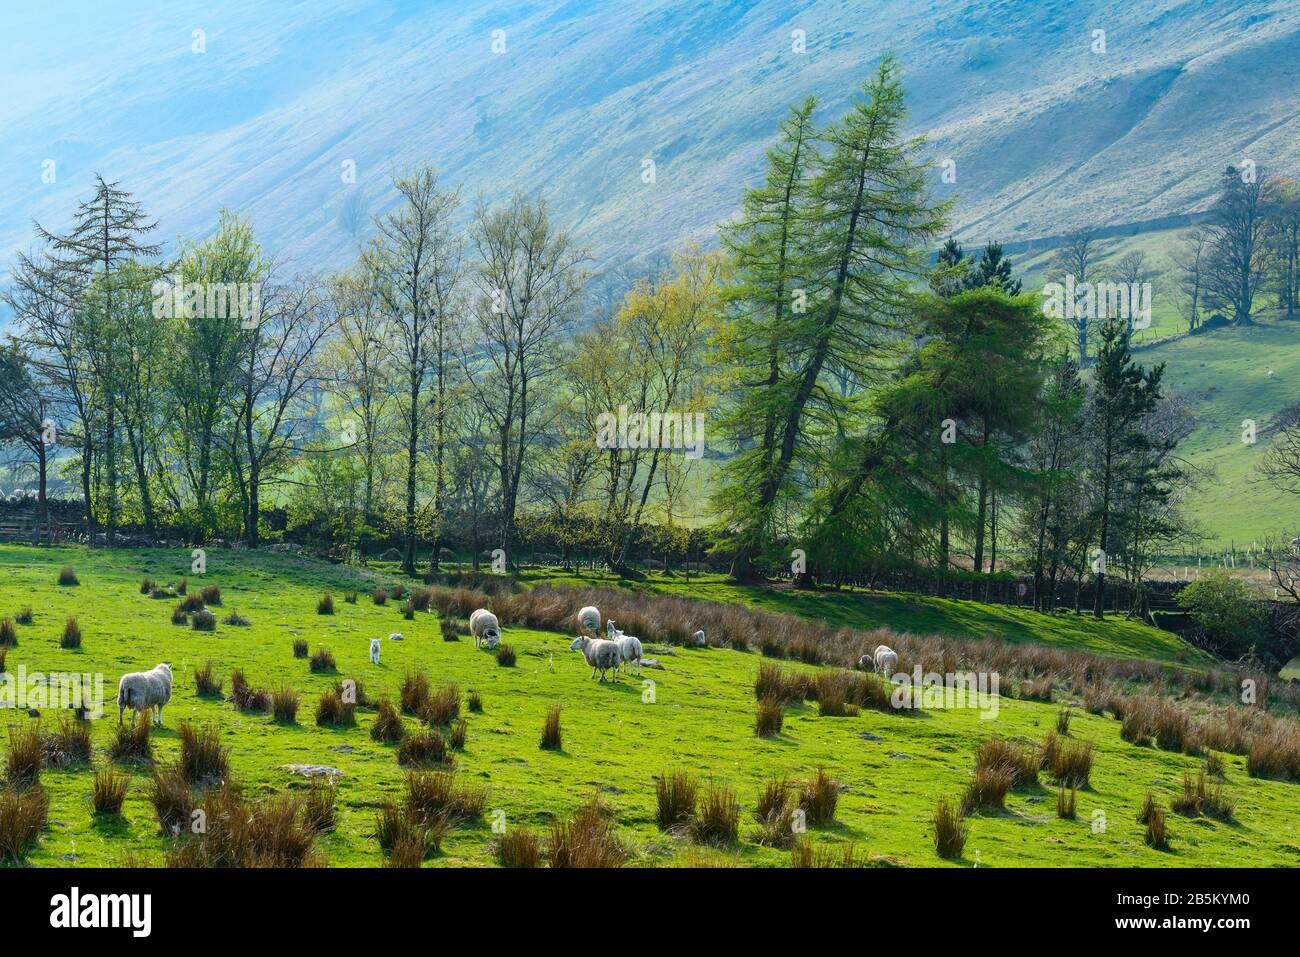 Sheep grazing on bright green grass during lambing season on the lower slopes of Birkhouse Moor near Patterdale, Lake District, Cumbria, UK, in April. Stock Photo